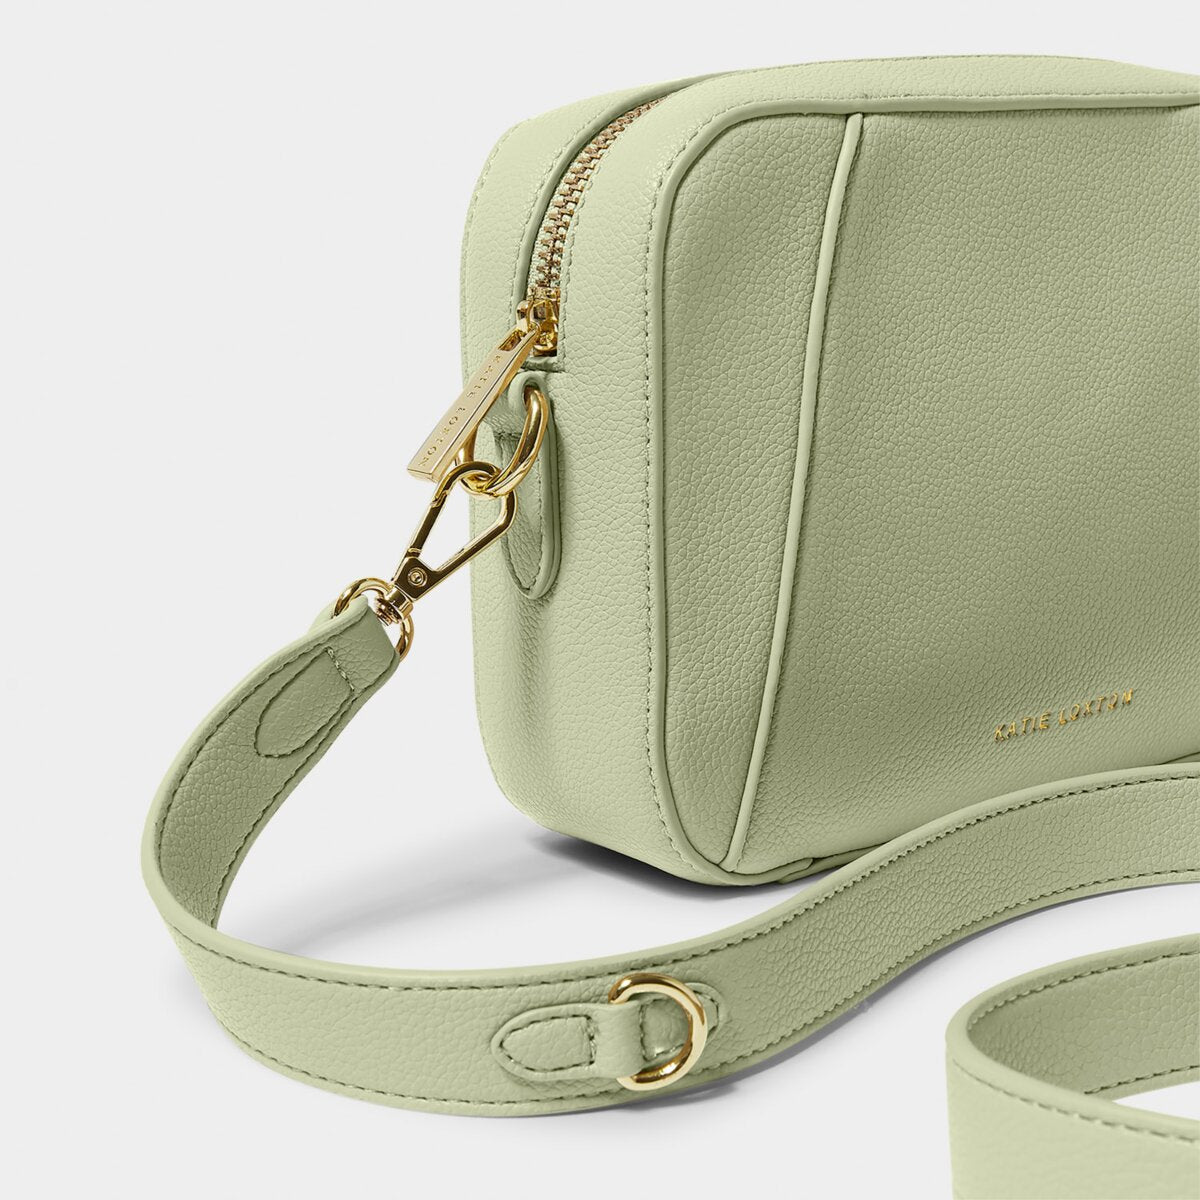 close up of a Crossbody handbag in soft sage greeen, focussing on the gold zipper and bag hardware